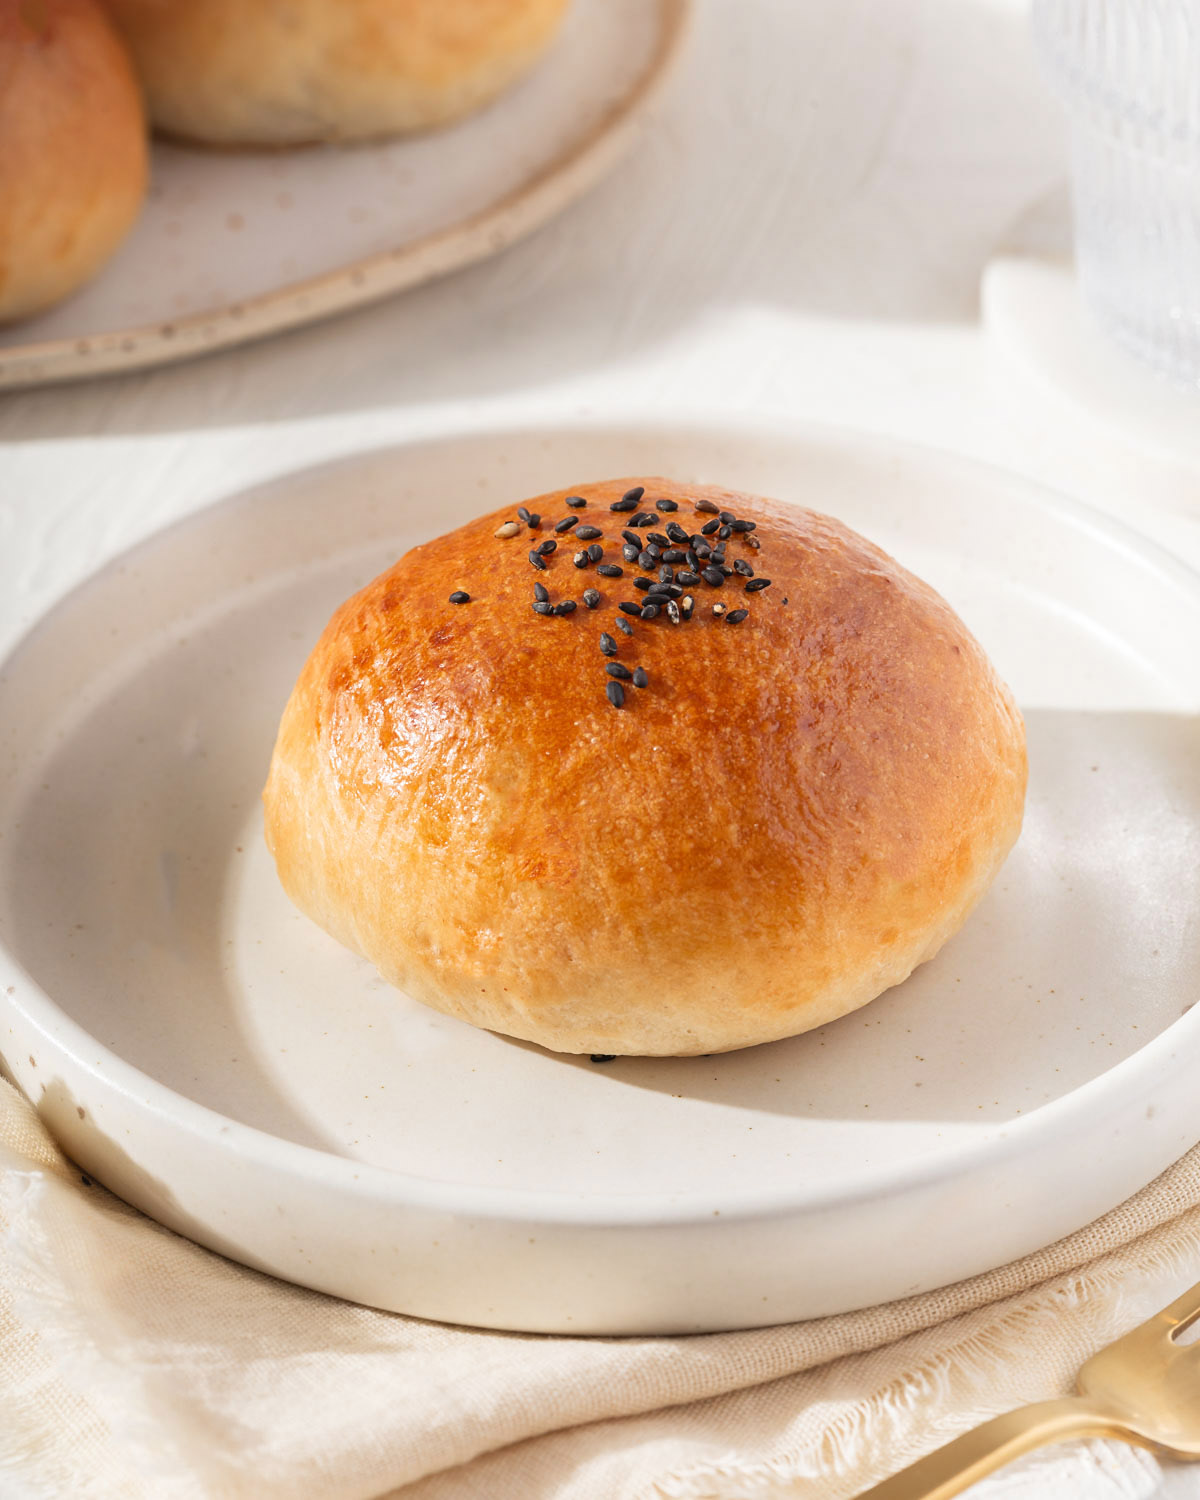 A baked Chinese BBQ pork bun on a plate.